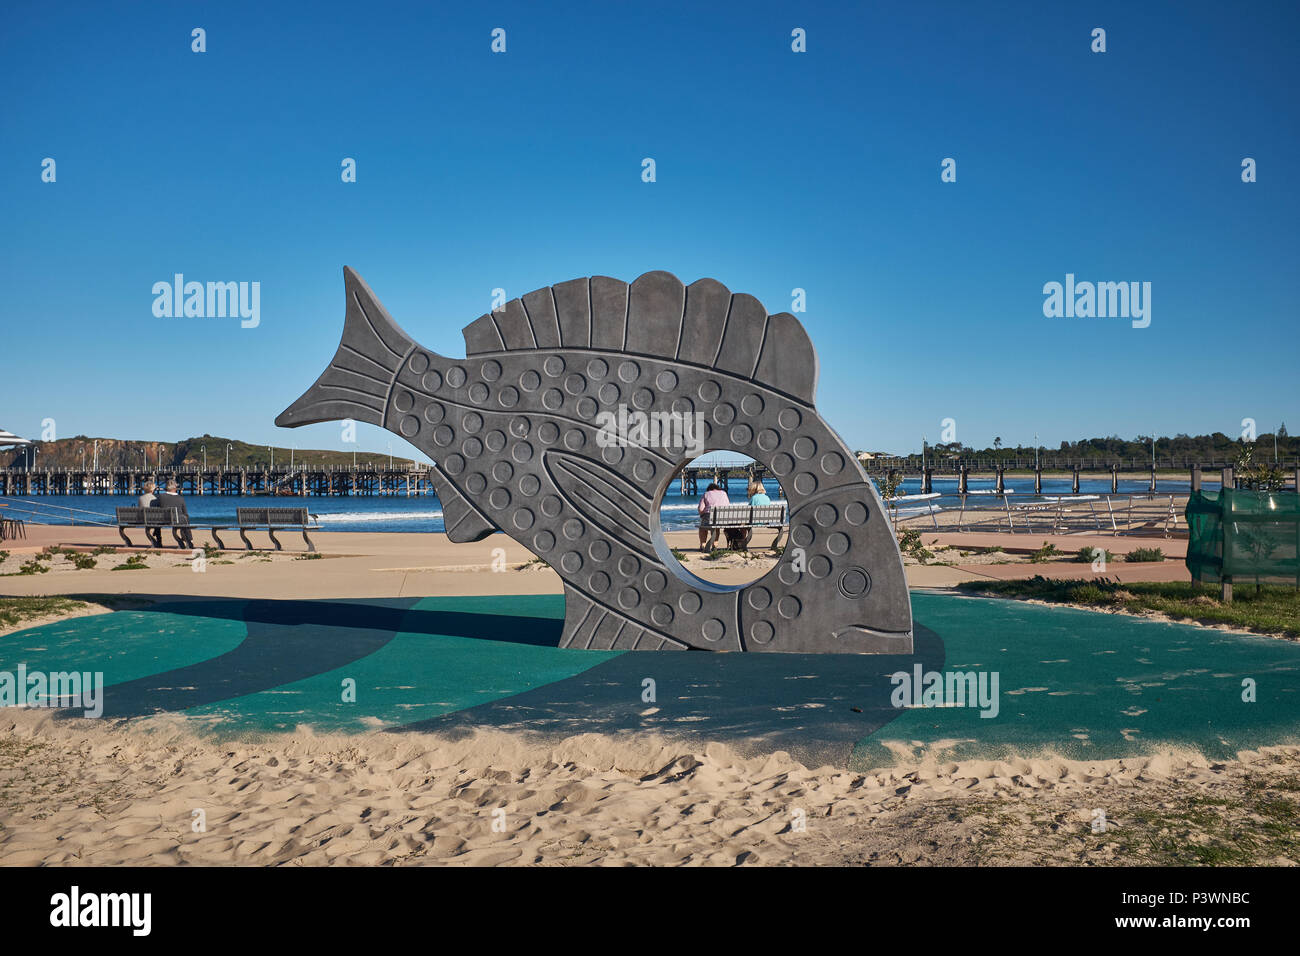 A large fish sculpture called Cruising made from concrete at Jetty Foreshores, Coffs Harbour, New South Wales, Australia Stock Photo